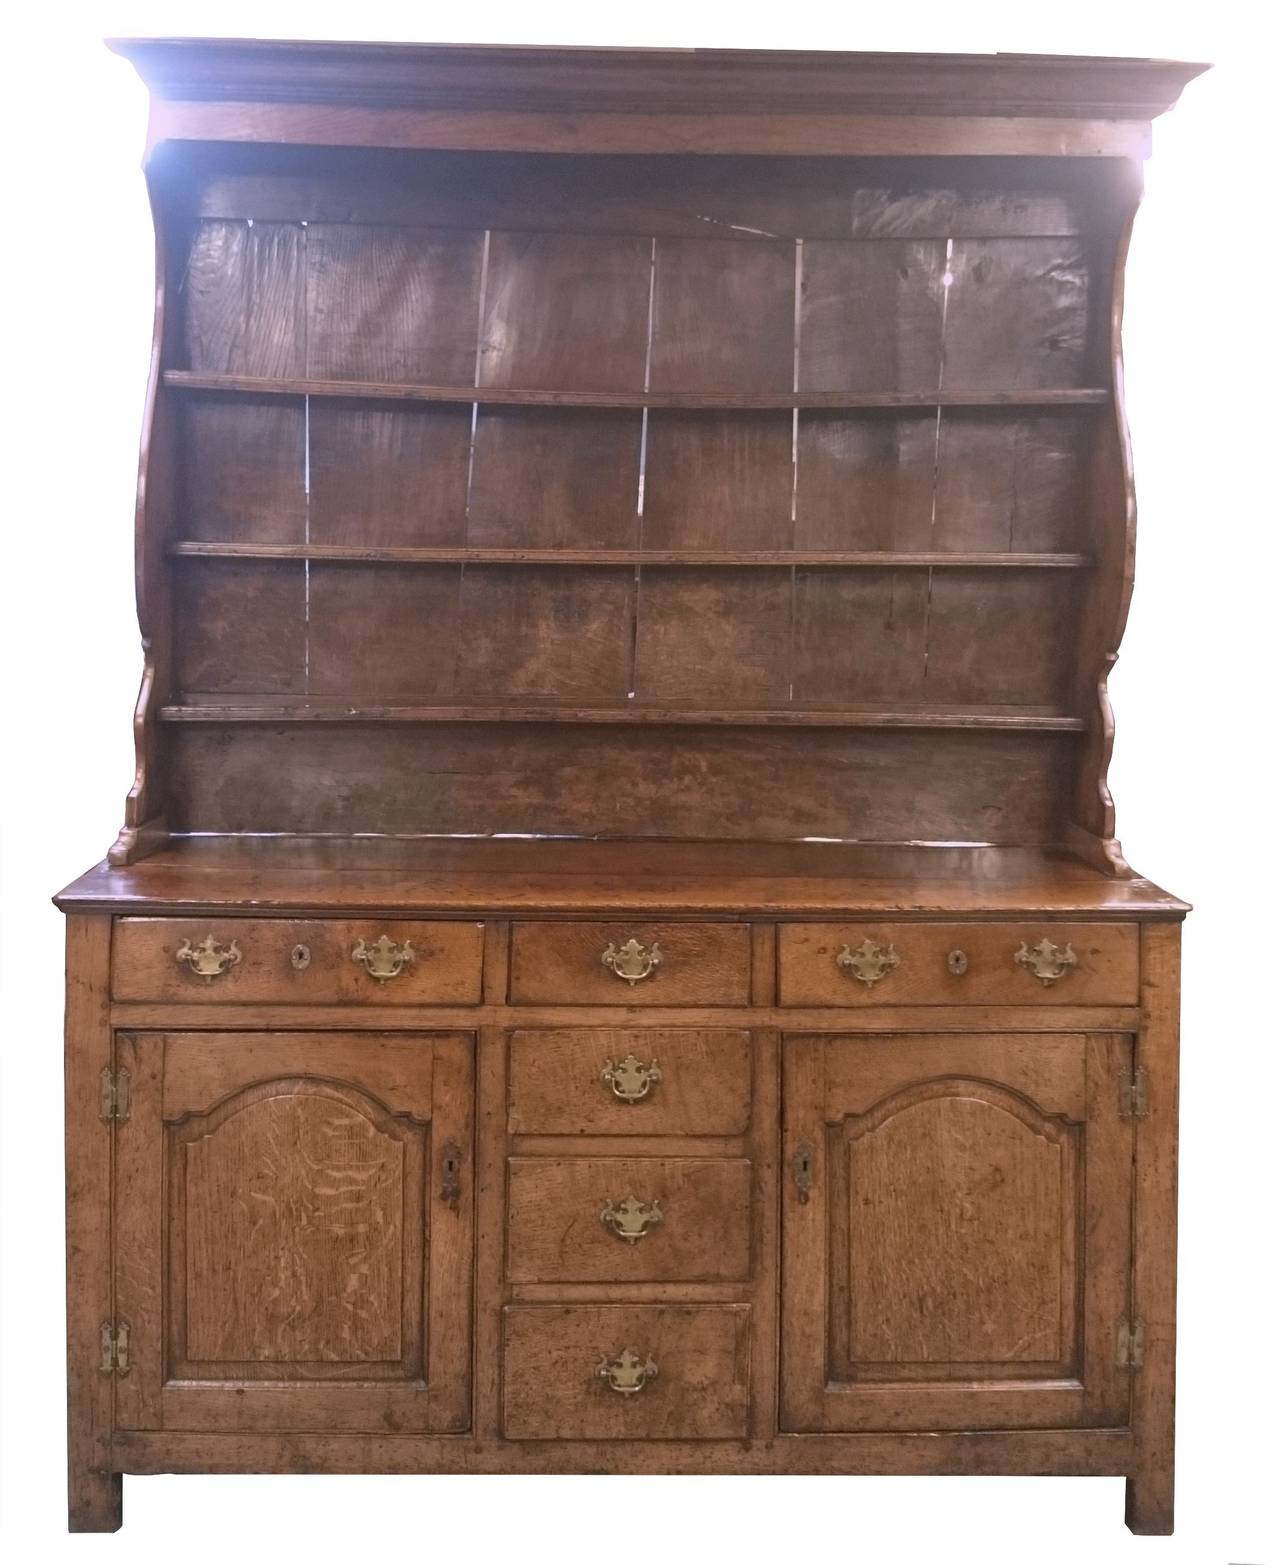 Early antique oak dresser with cupboards and drawers and false centre drawers. This dresser is a good size being not too large but with plenty of useful storage space. The oak is a really good cut, with lots of lovely medullary rays and is a really